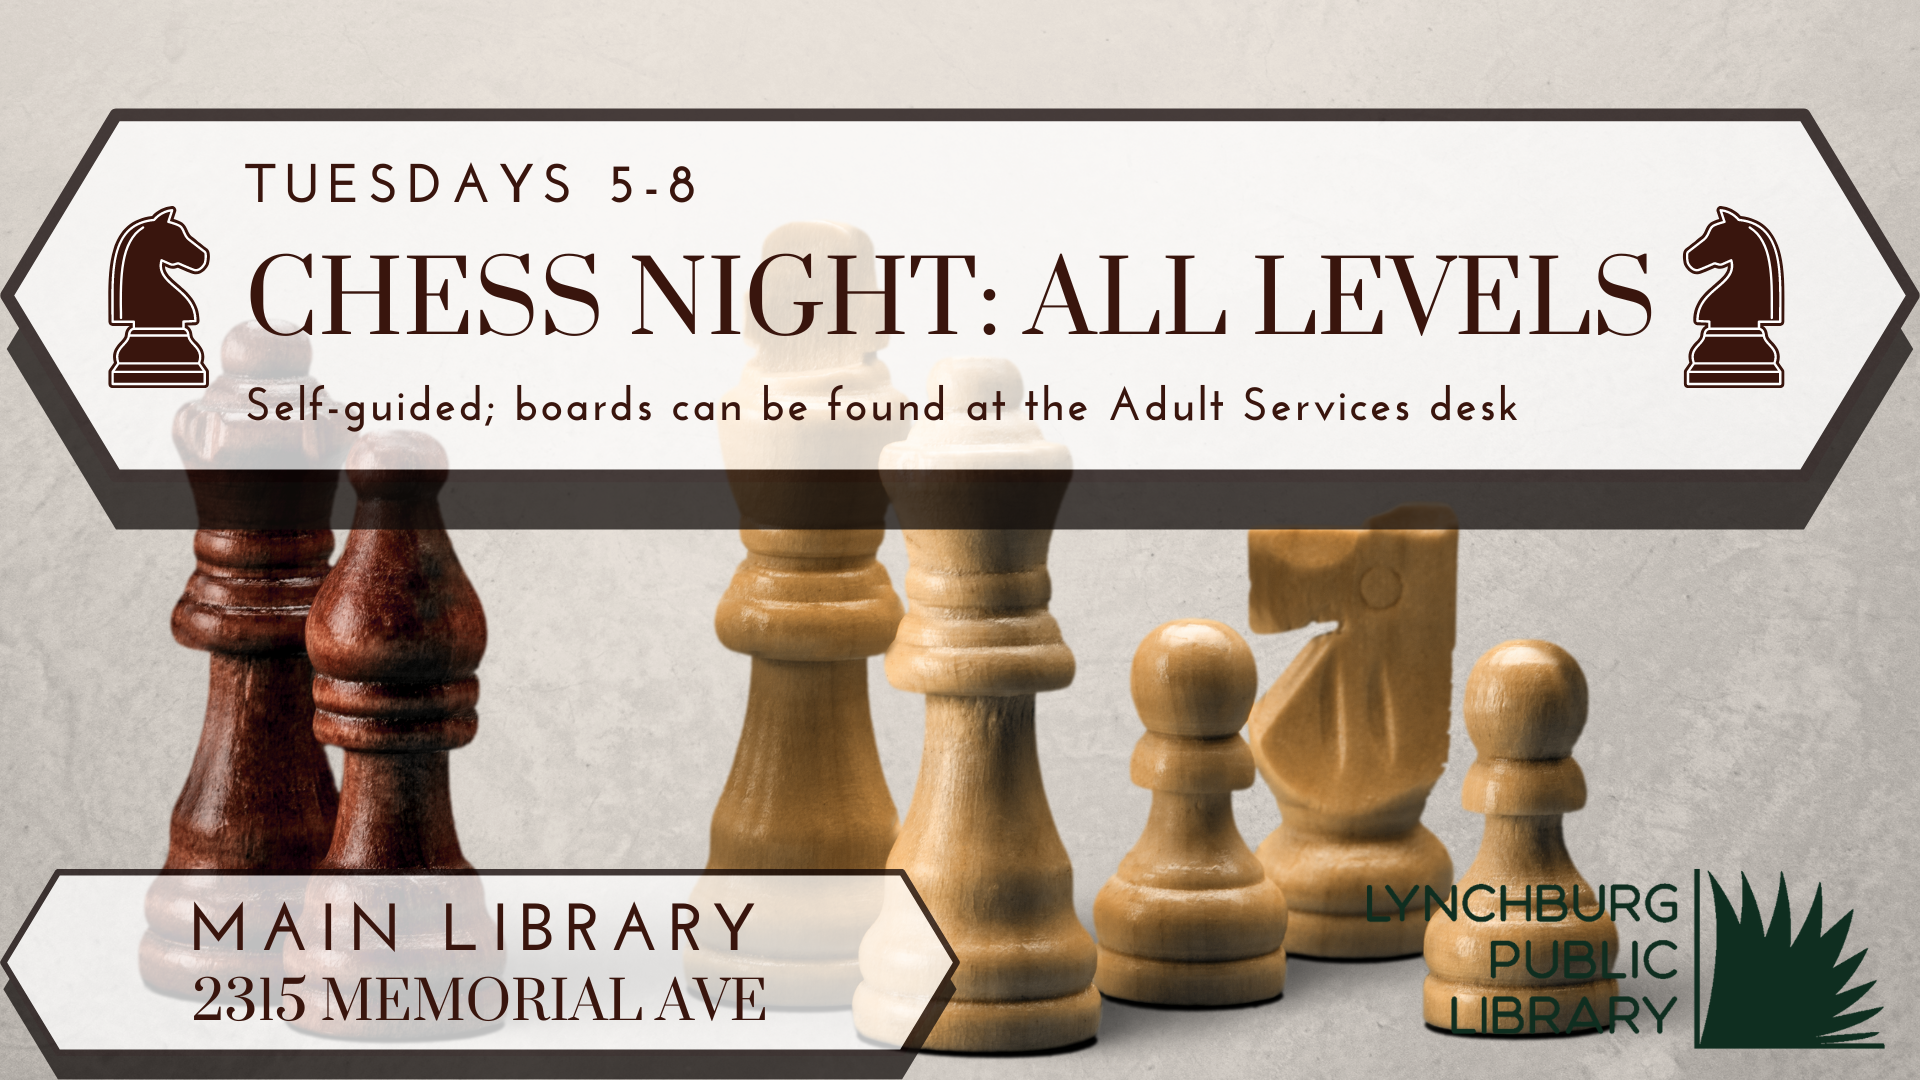 tuesdays 5-8; chess night: all levels; self-guided; boards can be found at the Adult Services desk; main library, 2315 memorial library